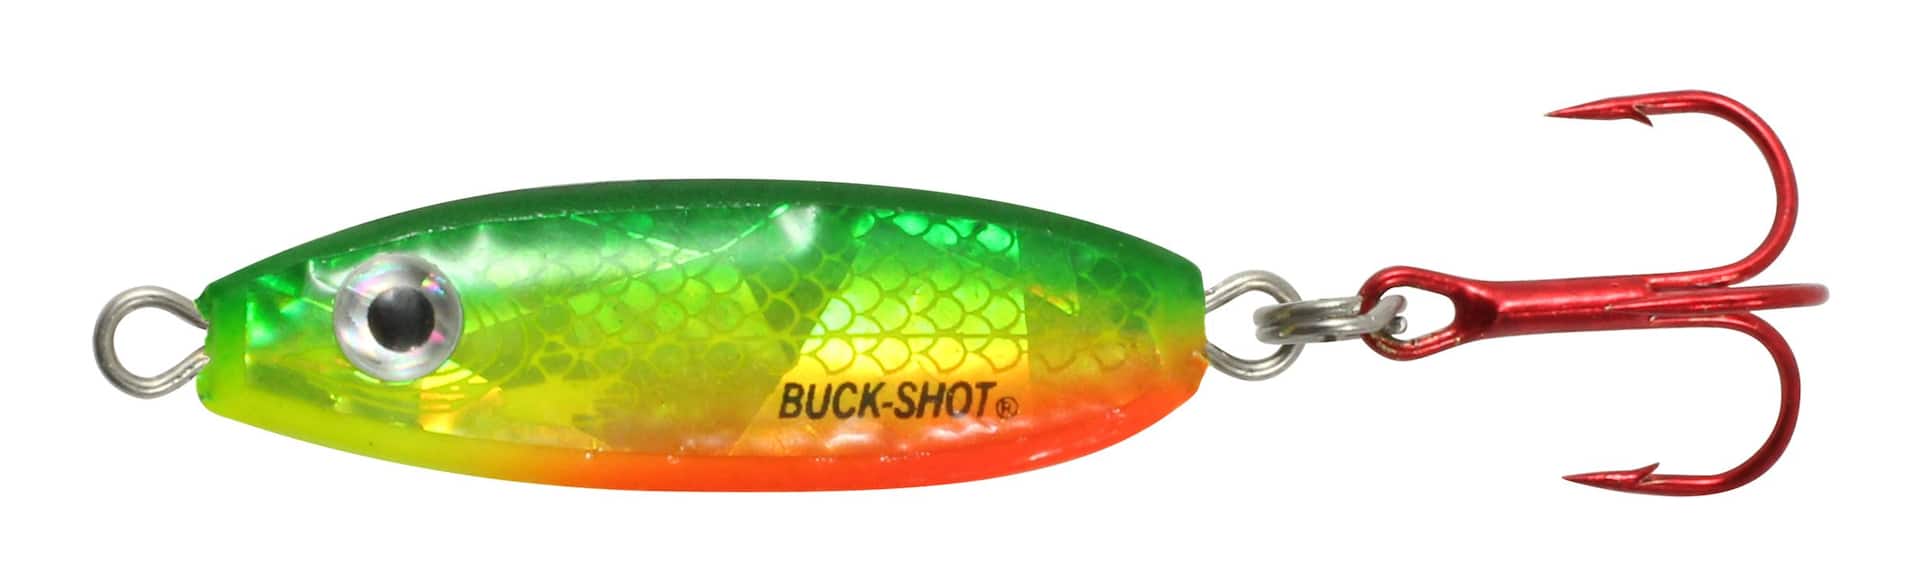 https://media-www.canadiantire.ca/product/playing/fishing/ice-fishing/0771820/northland-buck-shot-rattle-spoon-3-8oz-firetiger-4679f942-f55a-4ca2-8610-e797a3fcb288-jpgrendition.jpg